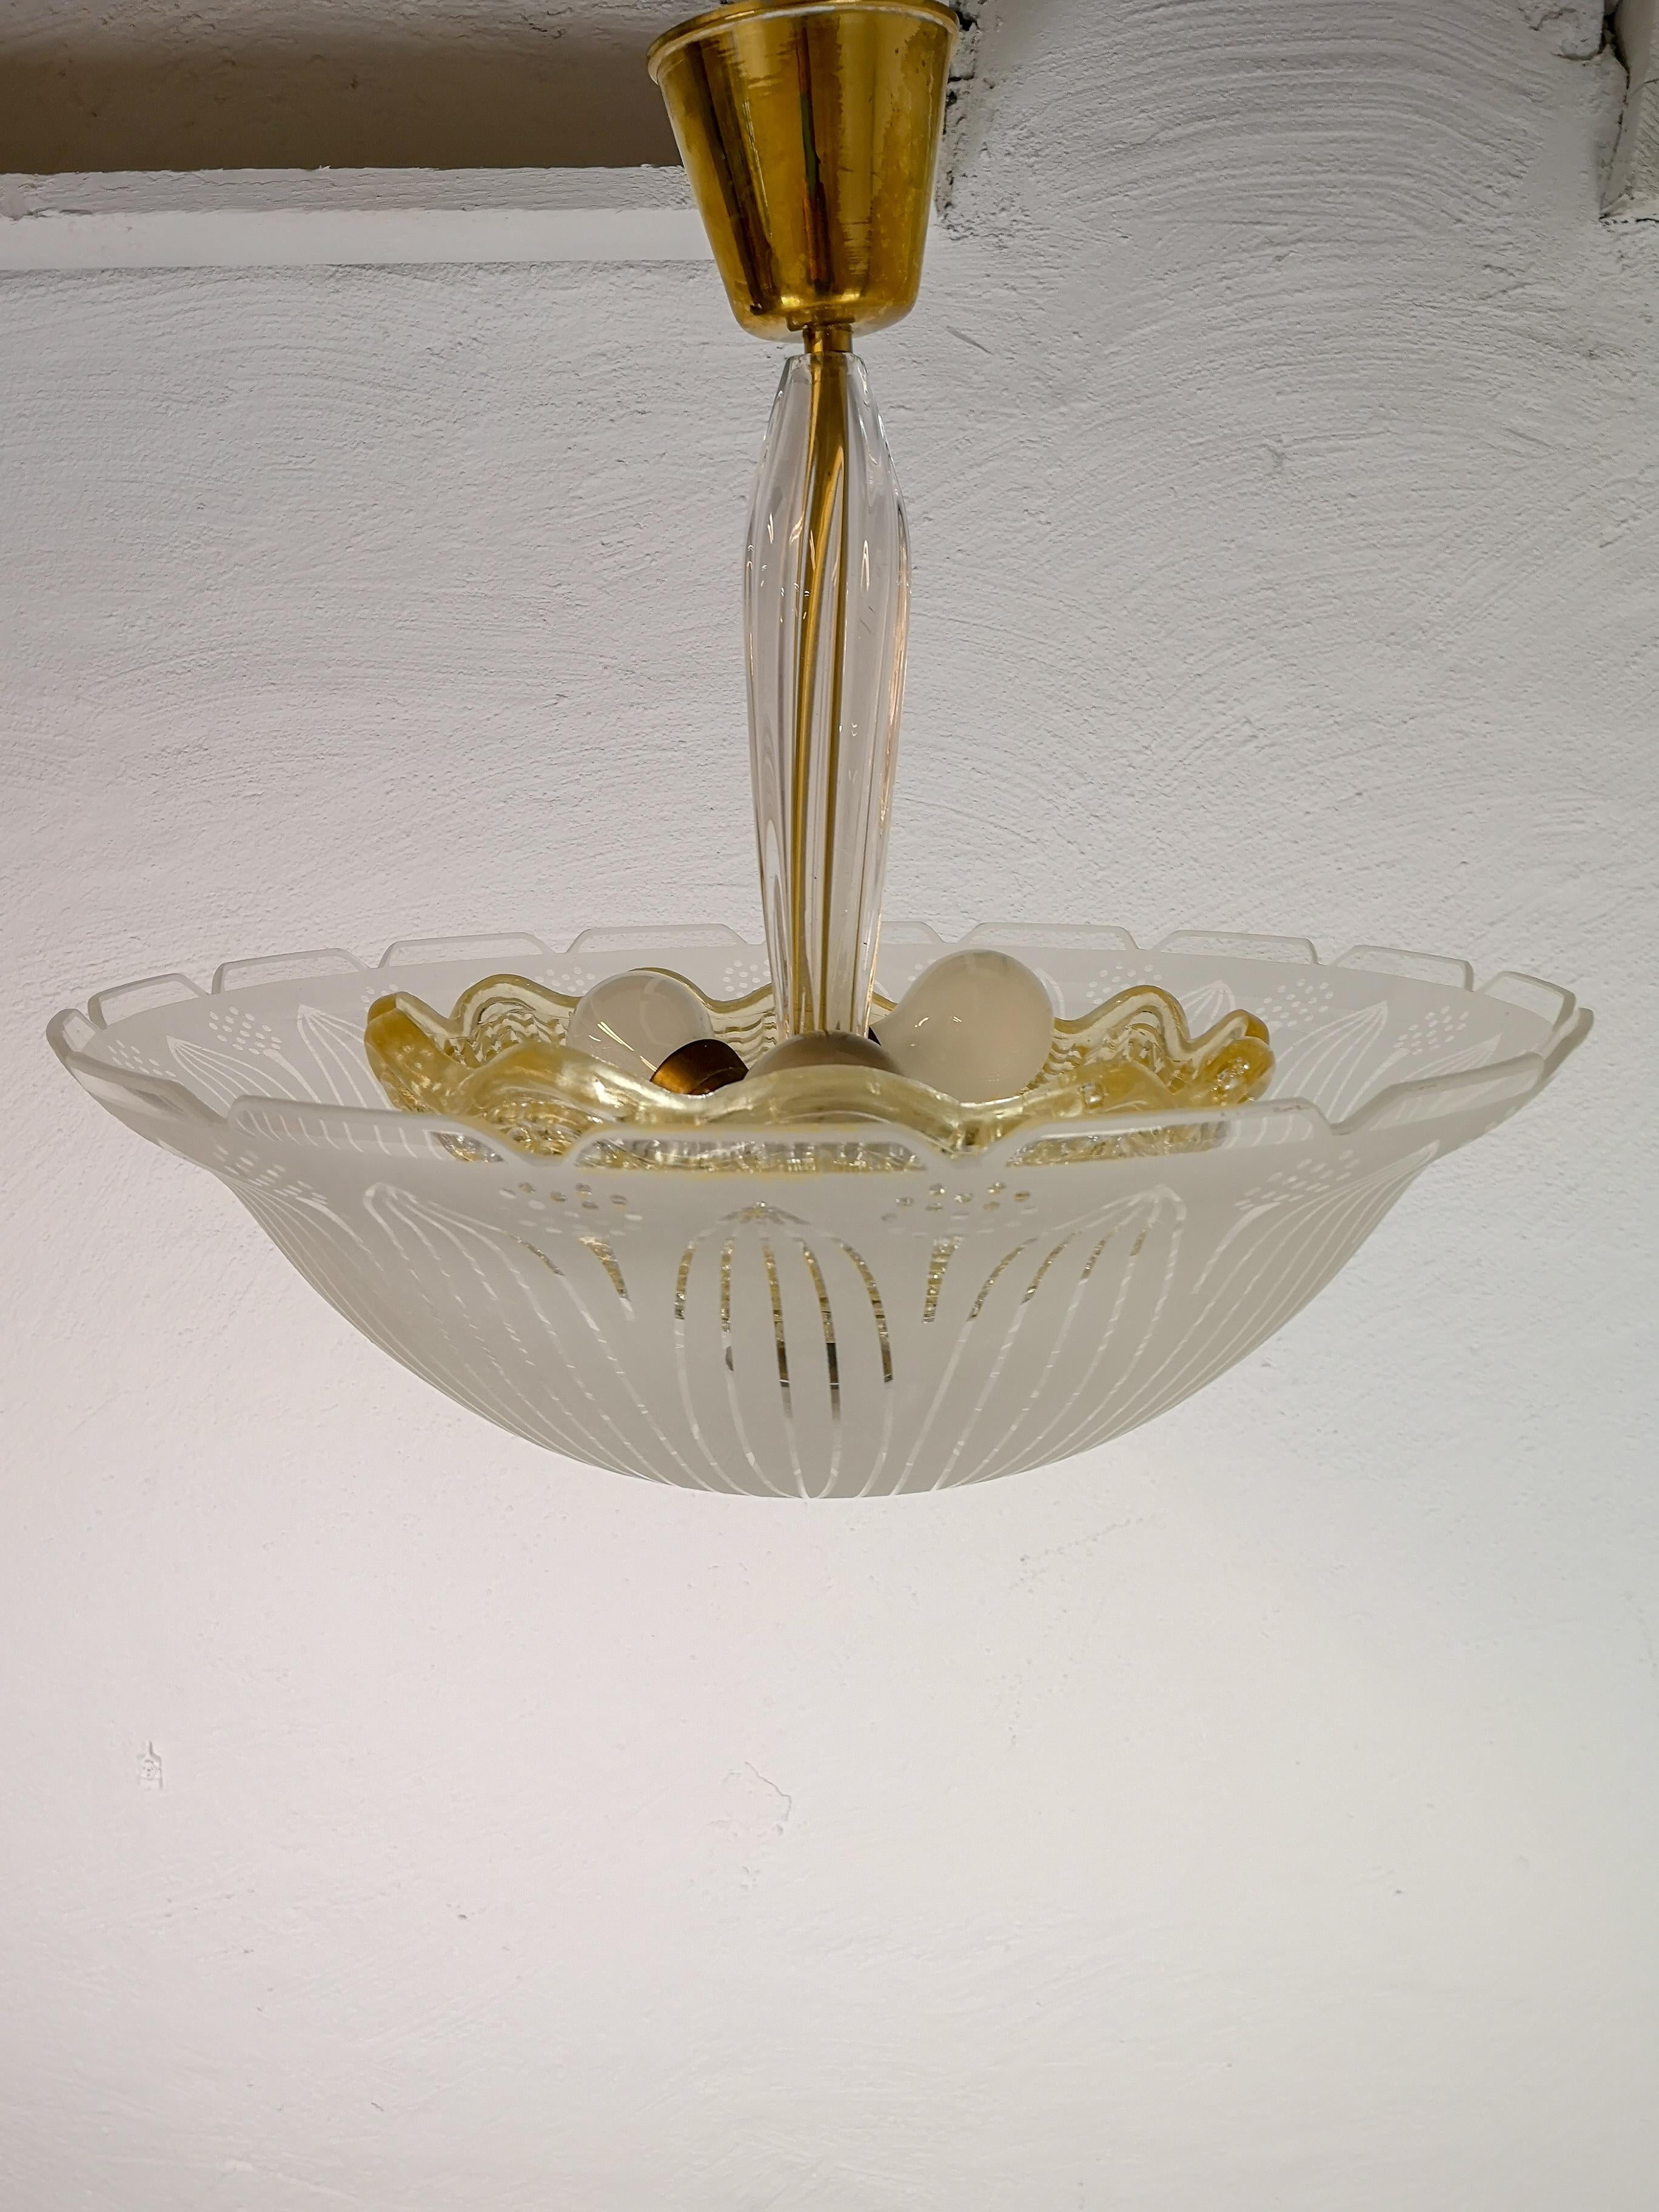 Large Swedish Orrefors Textured Glass Ceiling Fixture In Good Condition For Sale In Hillringsberg, SE